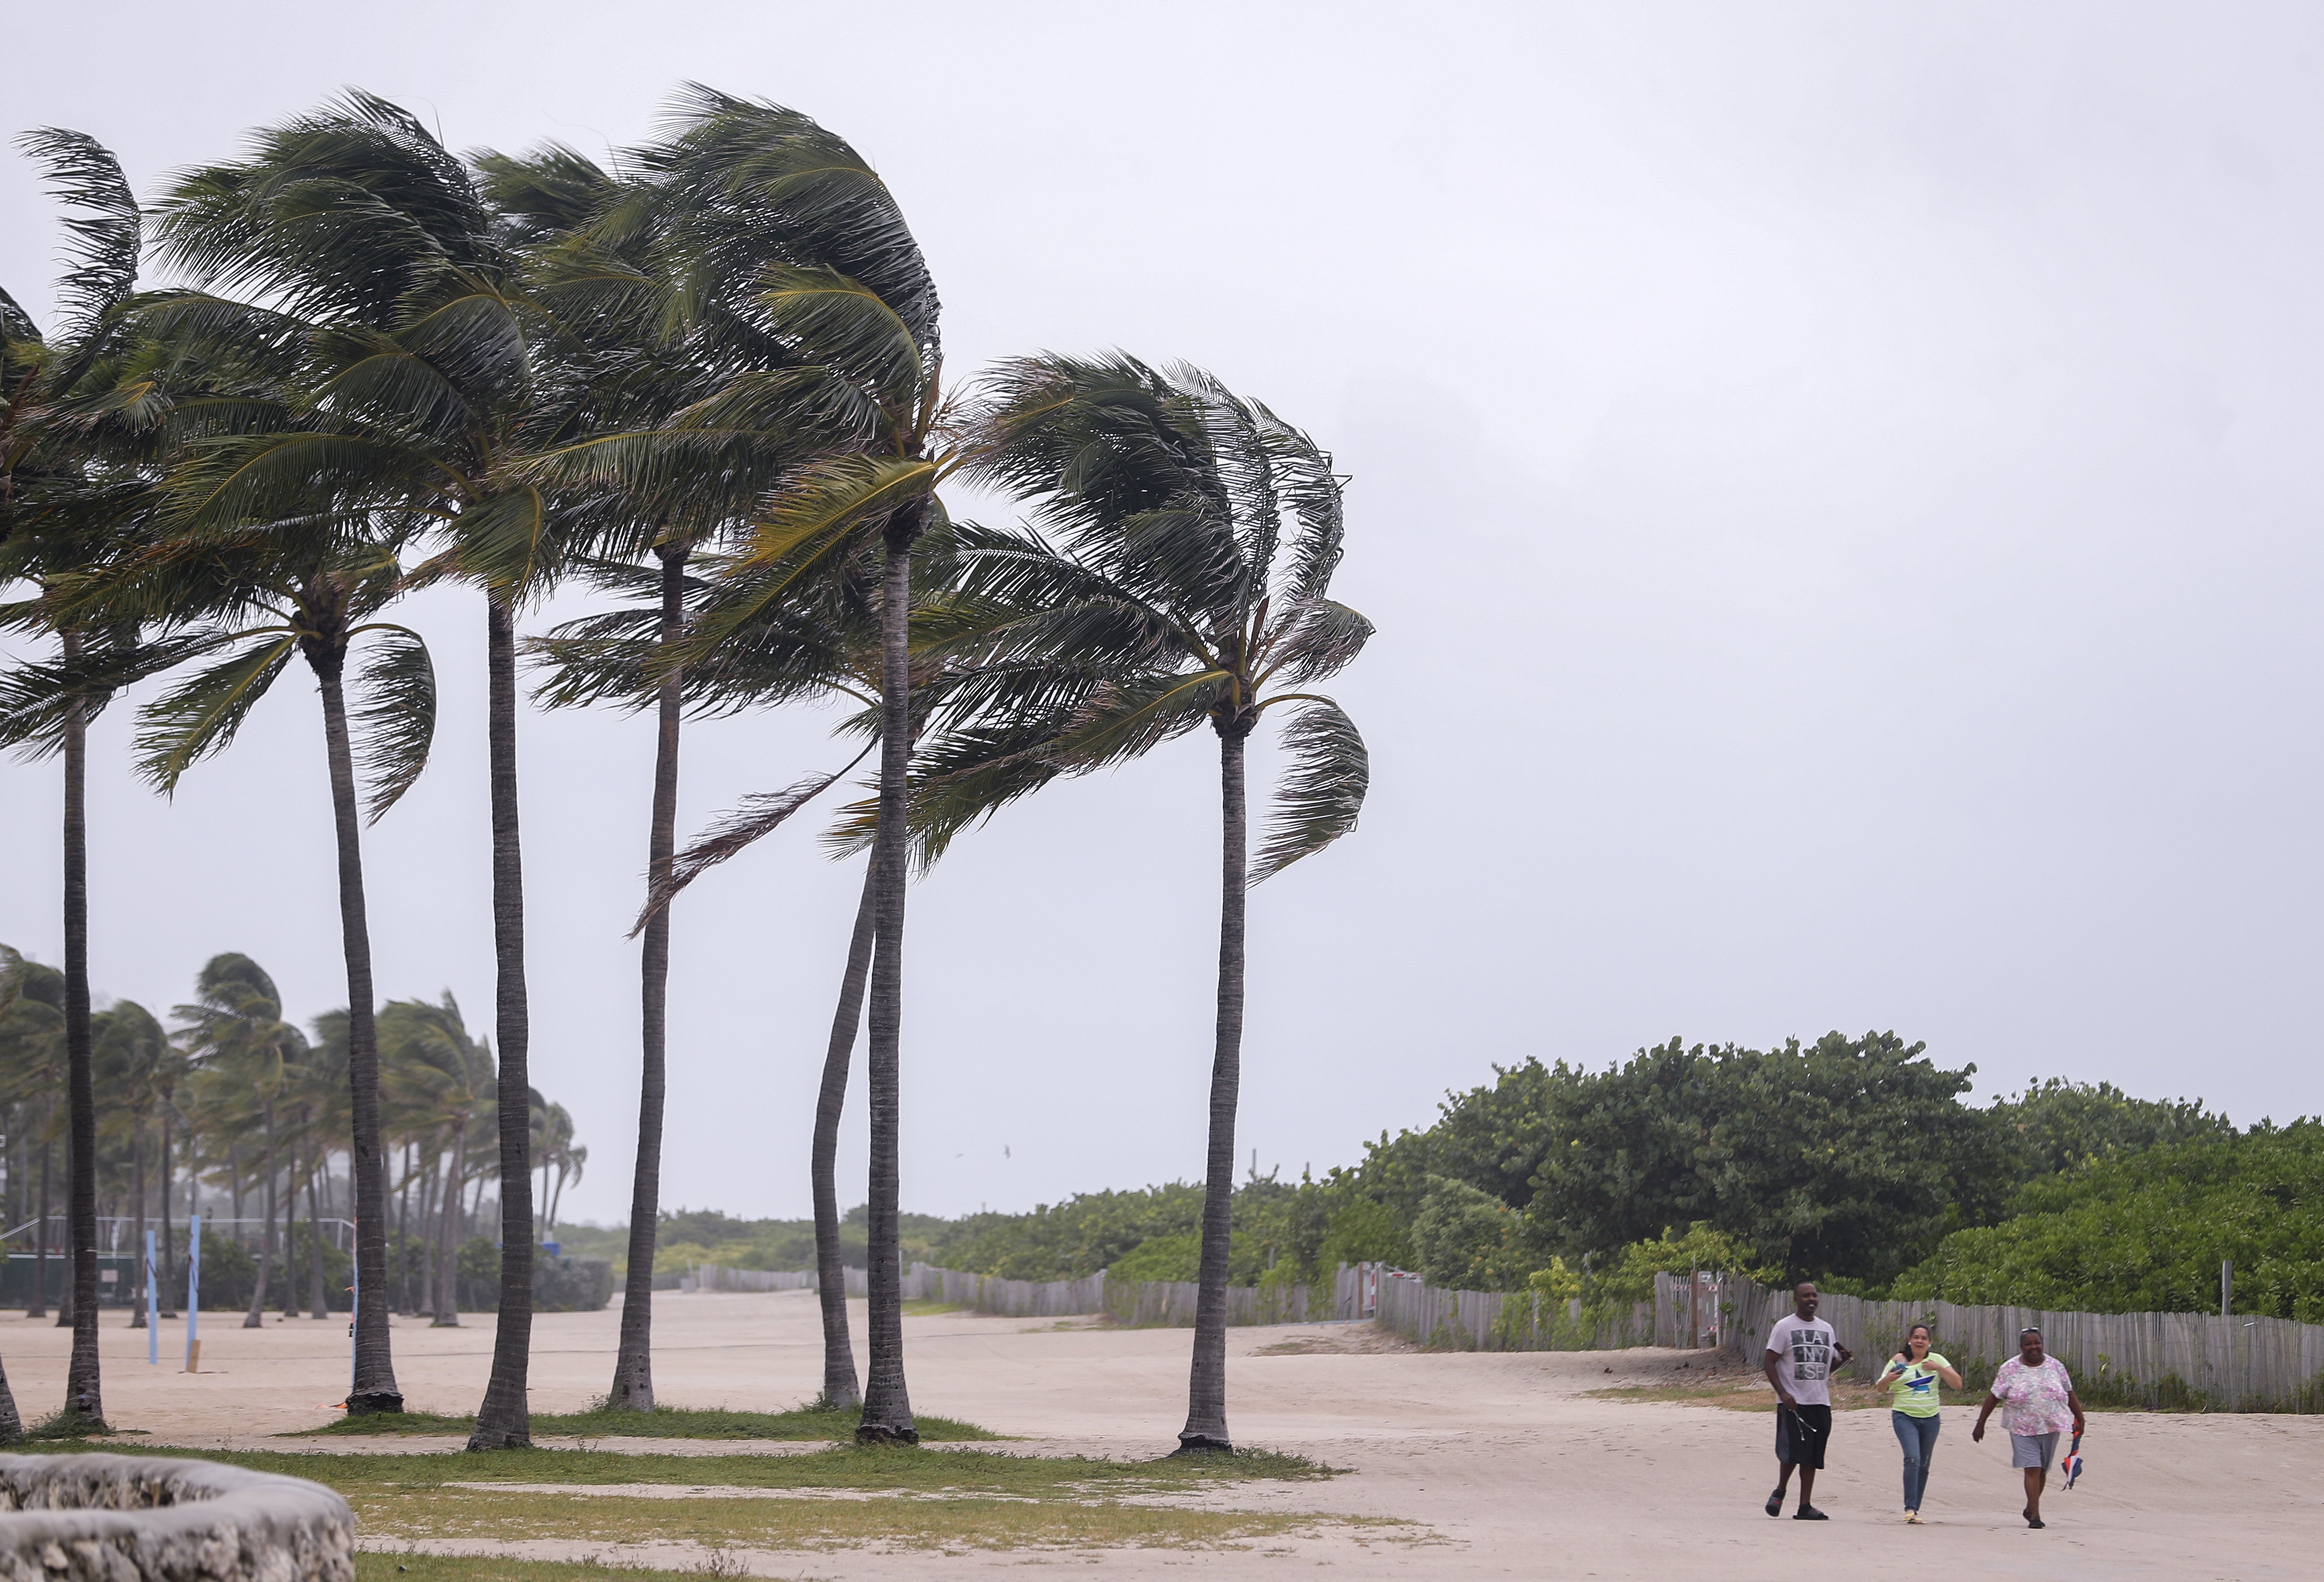 2017-09-09 14:31:51 epa06195269 People walk past blowing palm trees as the weather conditions deteriorate due to Hurricane Irma in Miami Beach, Florida, USA, 09 September 2017. Many areas are under mandatory evacuation orders as Irma approaches Florida. EPA/ERIK S. LESSER